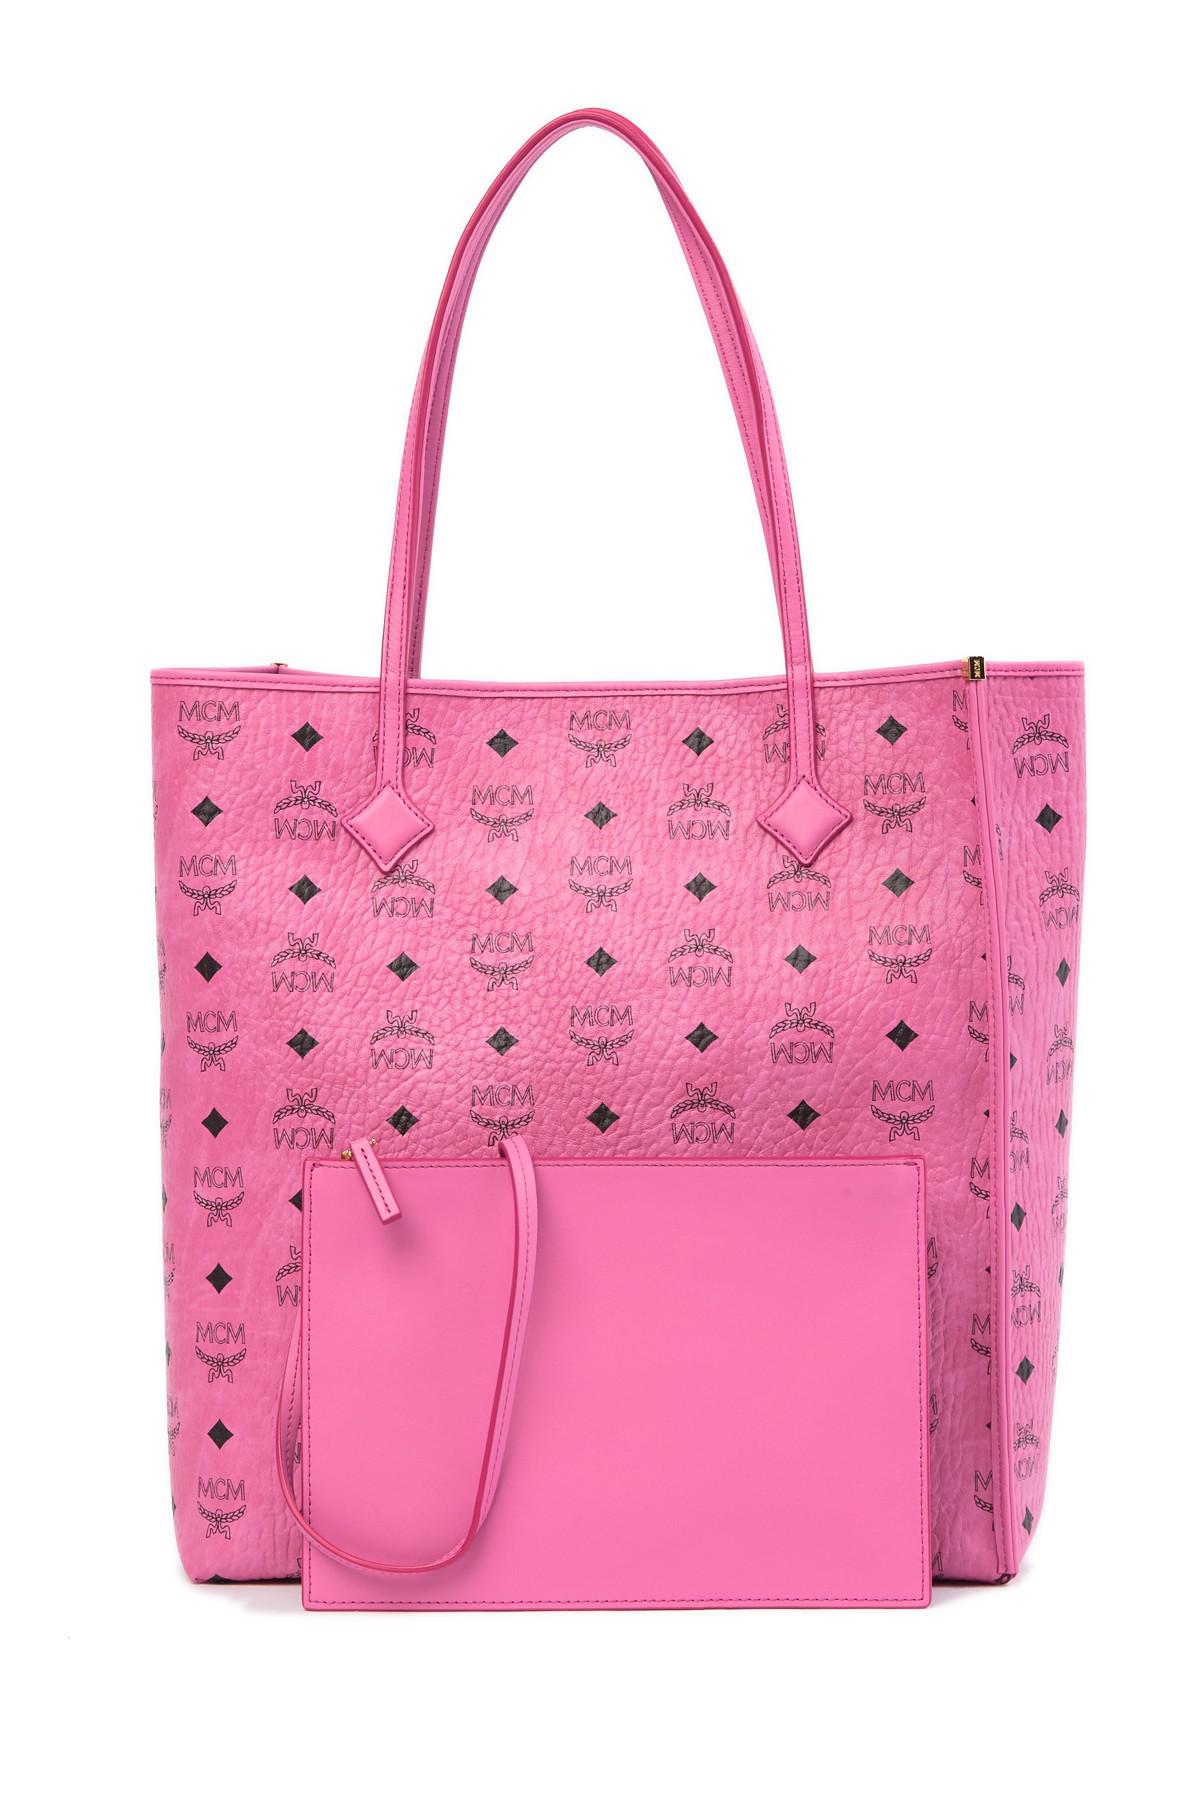 MCM Leather Monogrammed Shopper Tote in Pink - Lyst